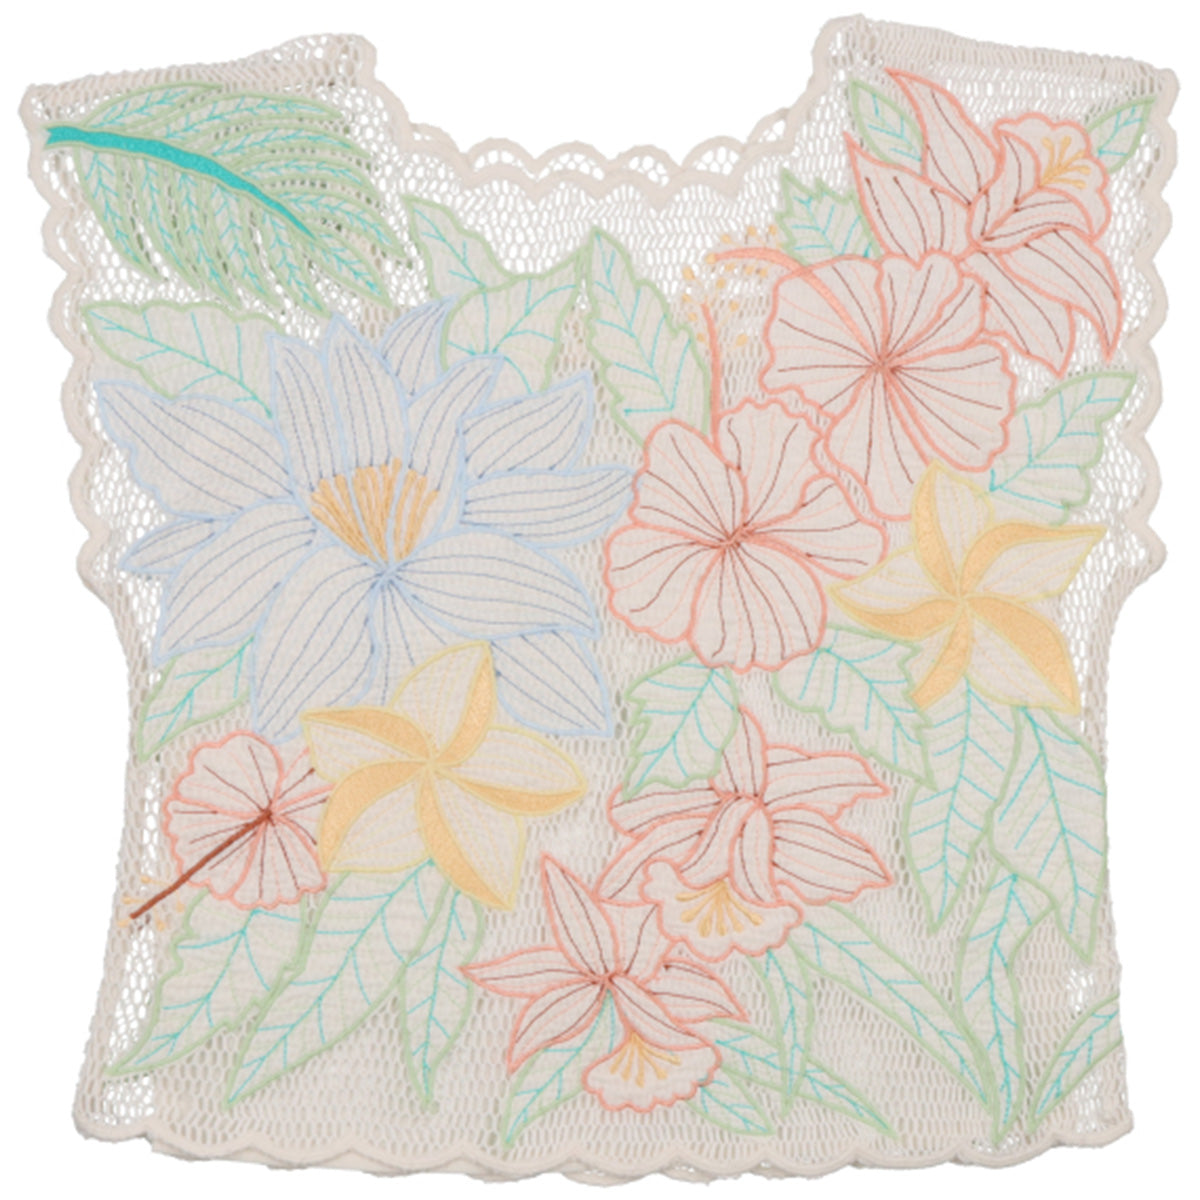 The Gardena Top from The New Society. The embroidery of this top is an ode to flowers and nature.